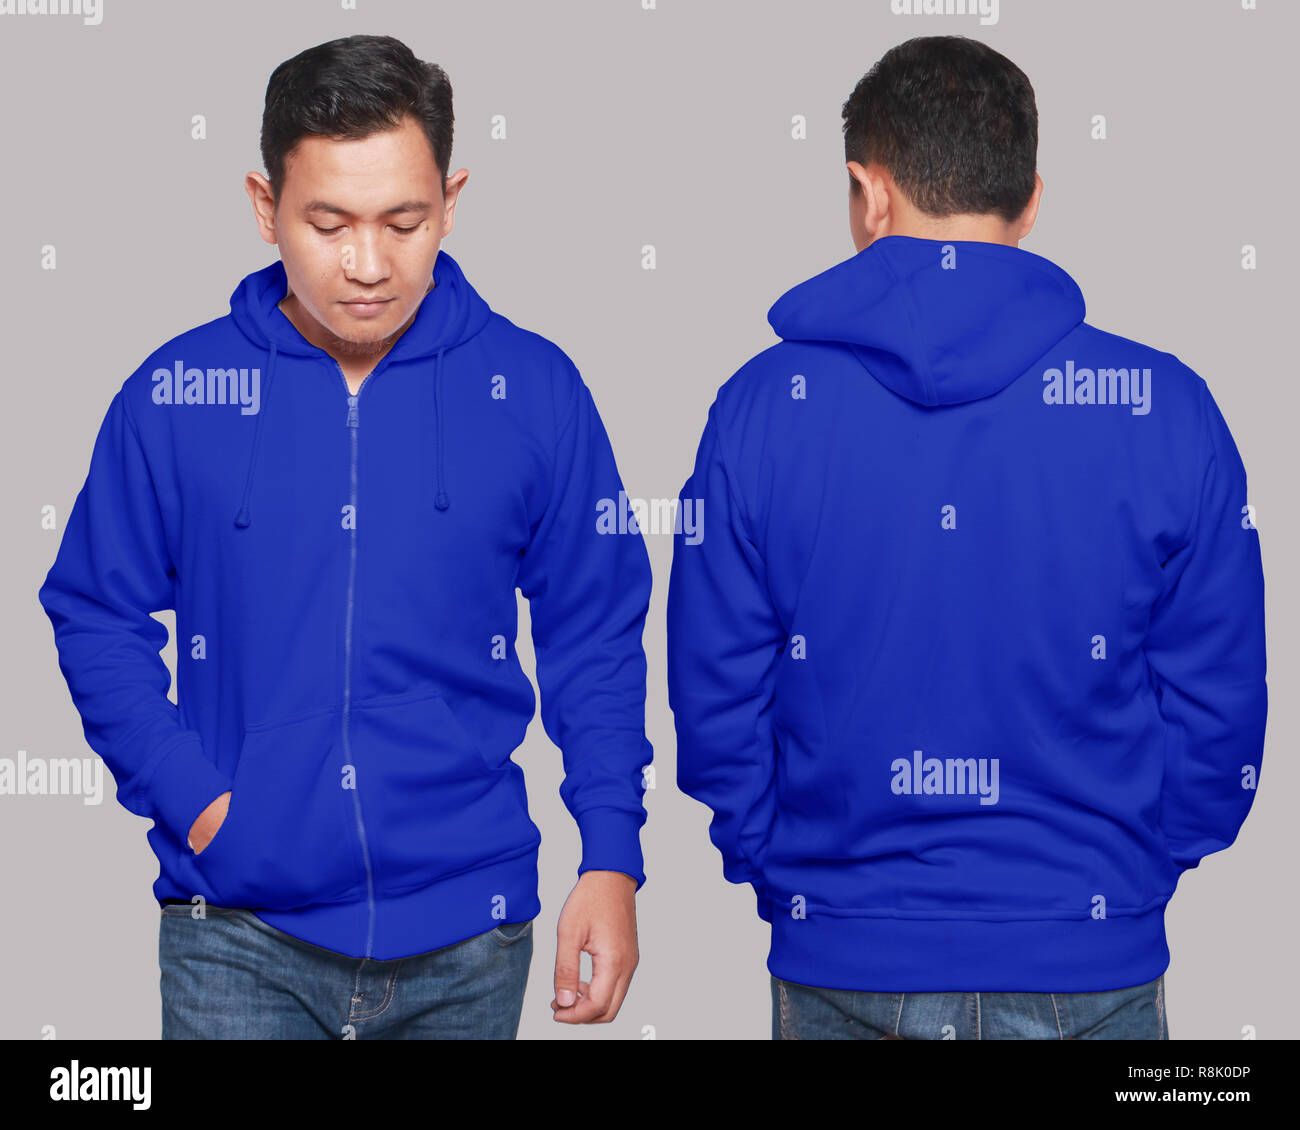 Blank sweatshirt mock up, front, and back view, isolated on grey. Asian male model wear plain blue hoodie mockup. Hoody design presentation. Jumper fo Stock Photo